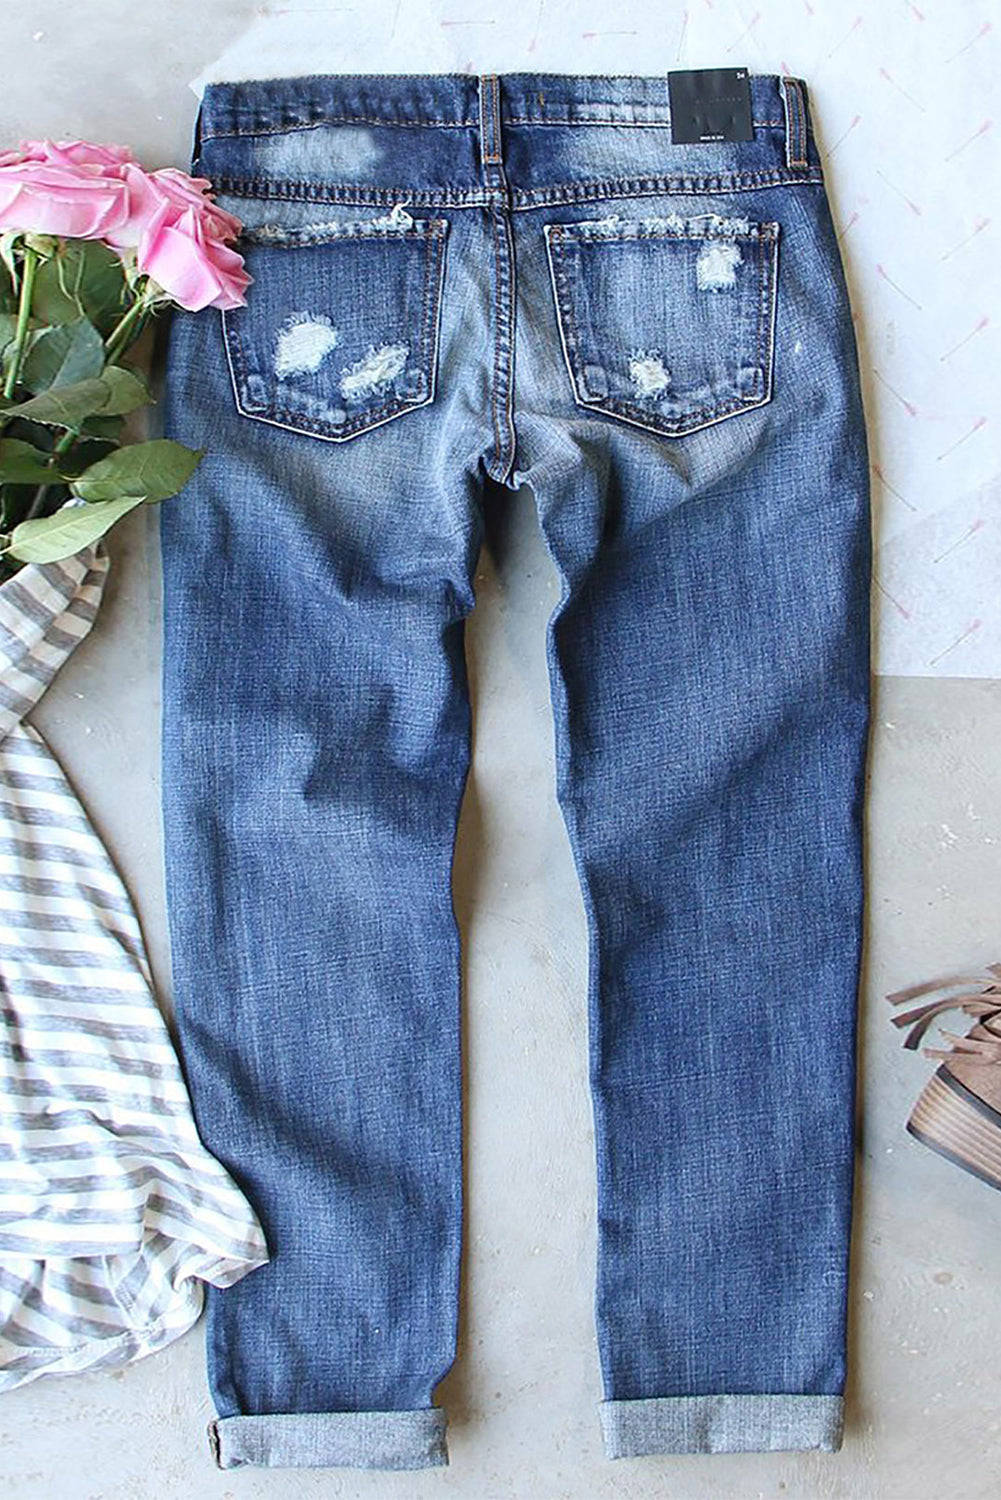 Sky Blue Floral Print Contrast Distressed Mid Waist Jeans